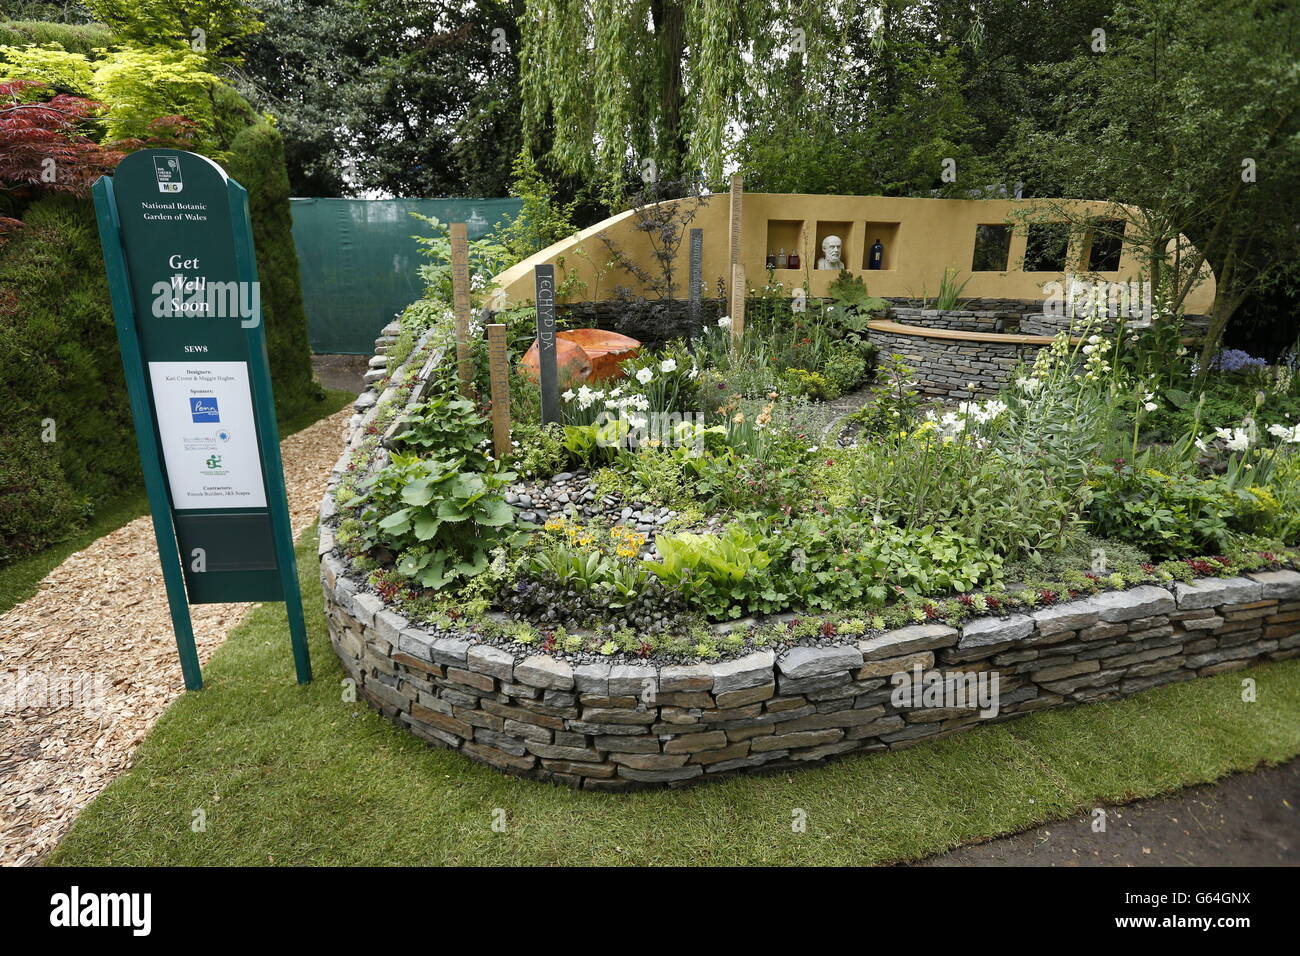 General view of the Get Well Soon Garden sponsored by the National Botanical Garden of Wales at the RHS Chelsea Flower Show, London. Stock Photo